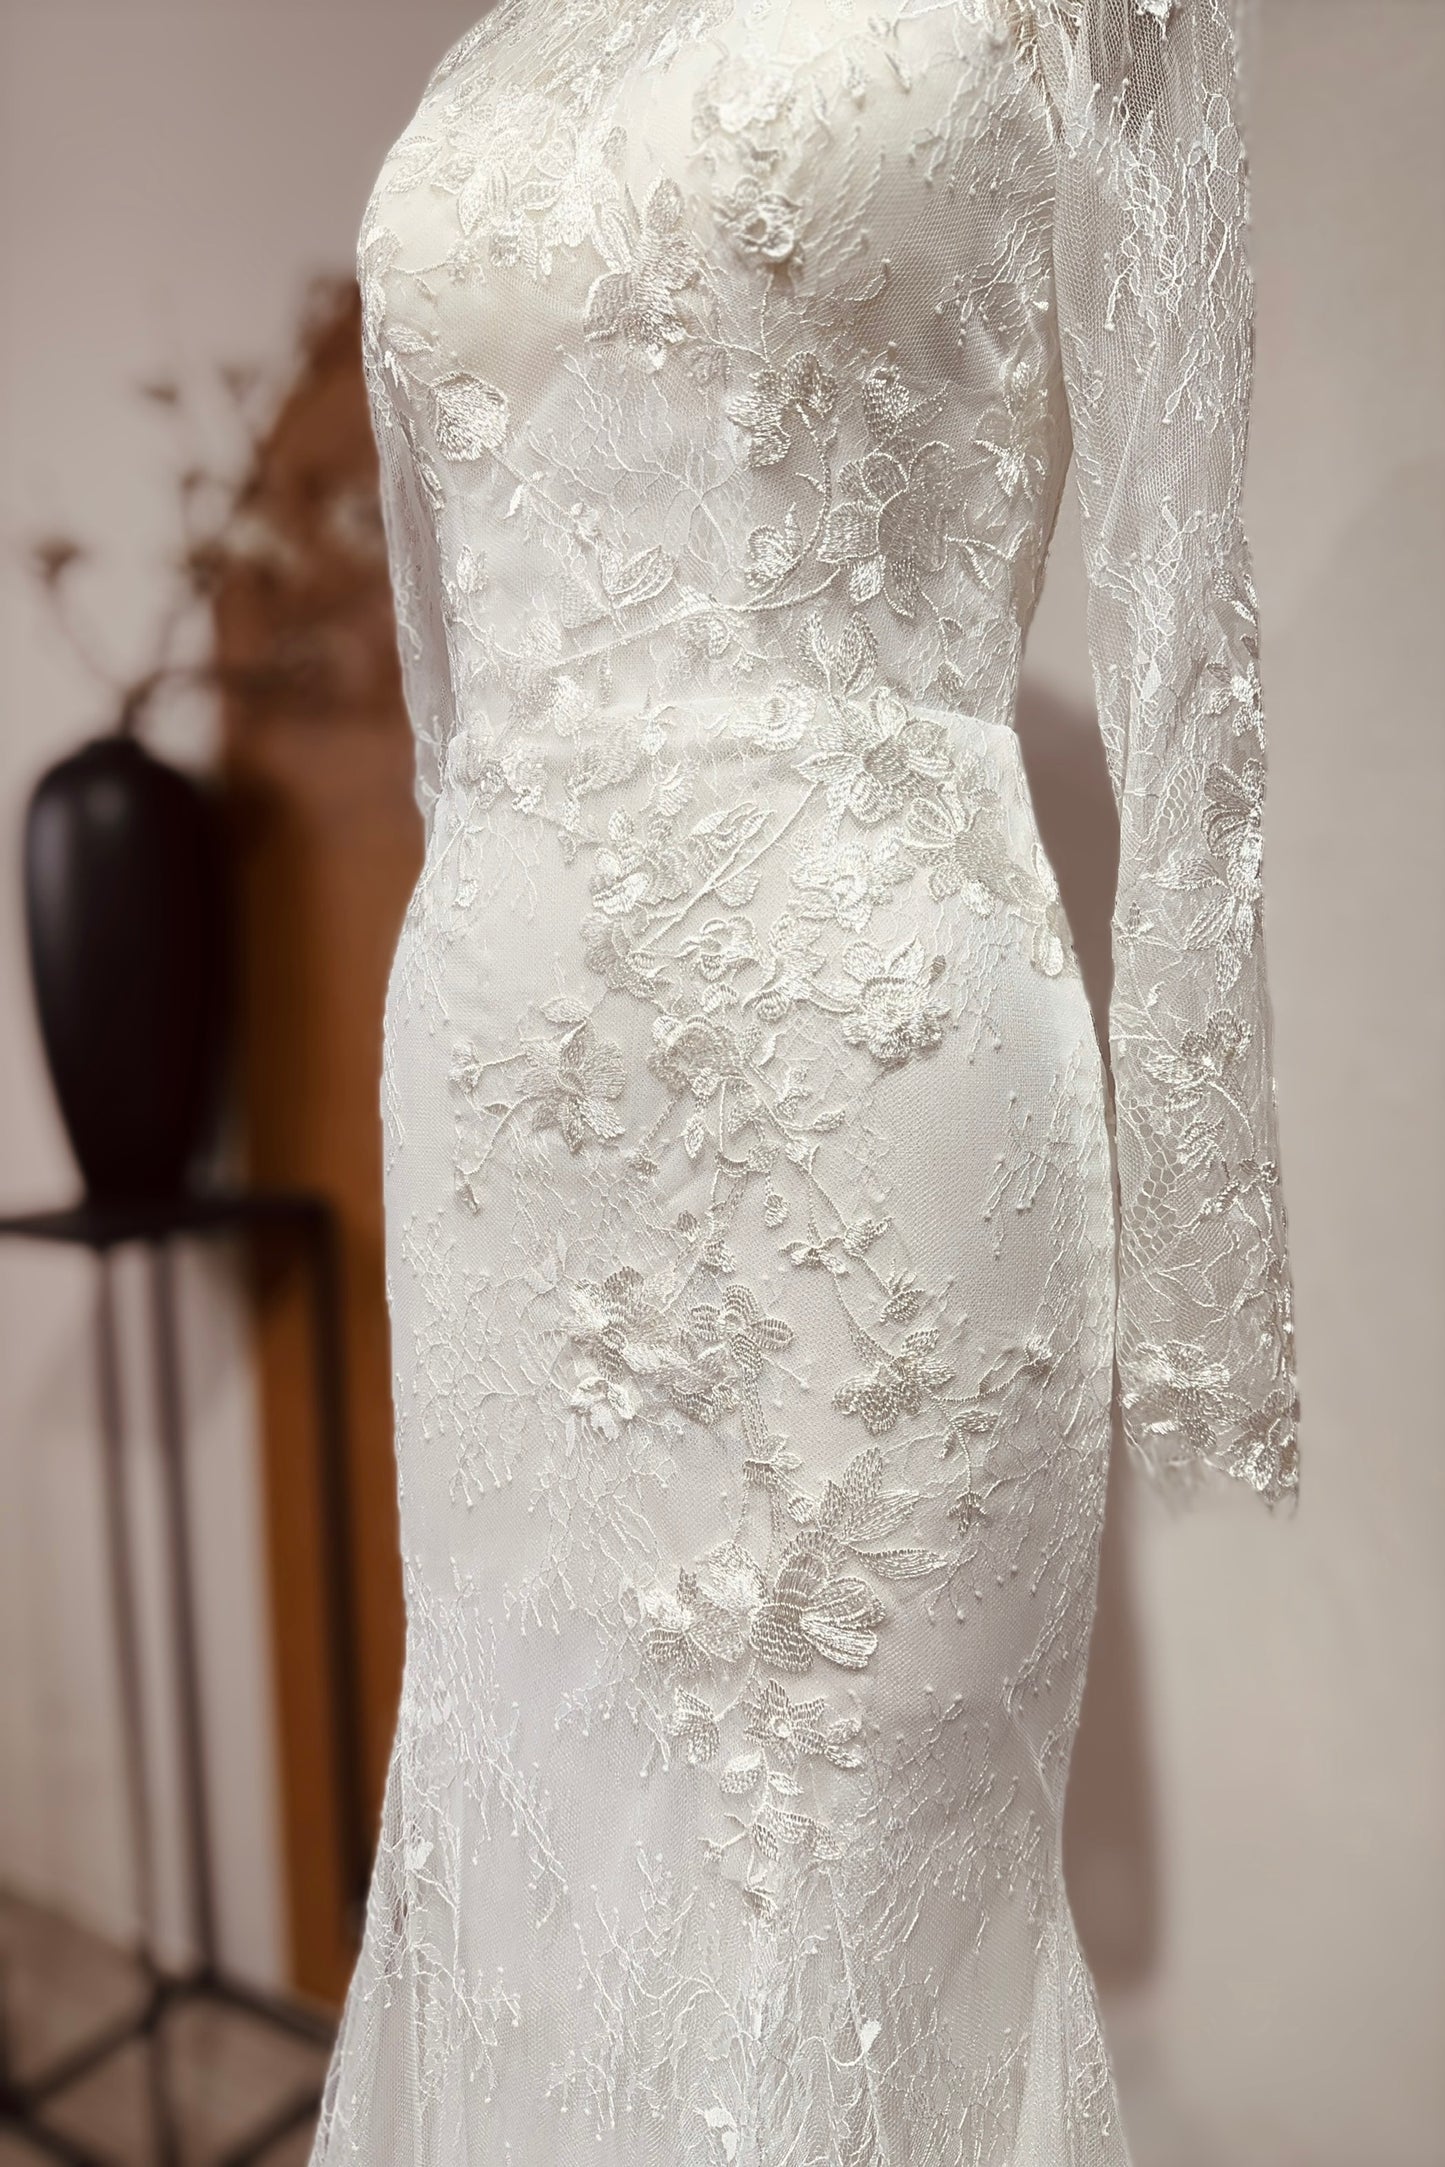 Itzi - Mermaid Long Sleeve Lace Wedding Gown, Customized to Bride's Specifications